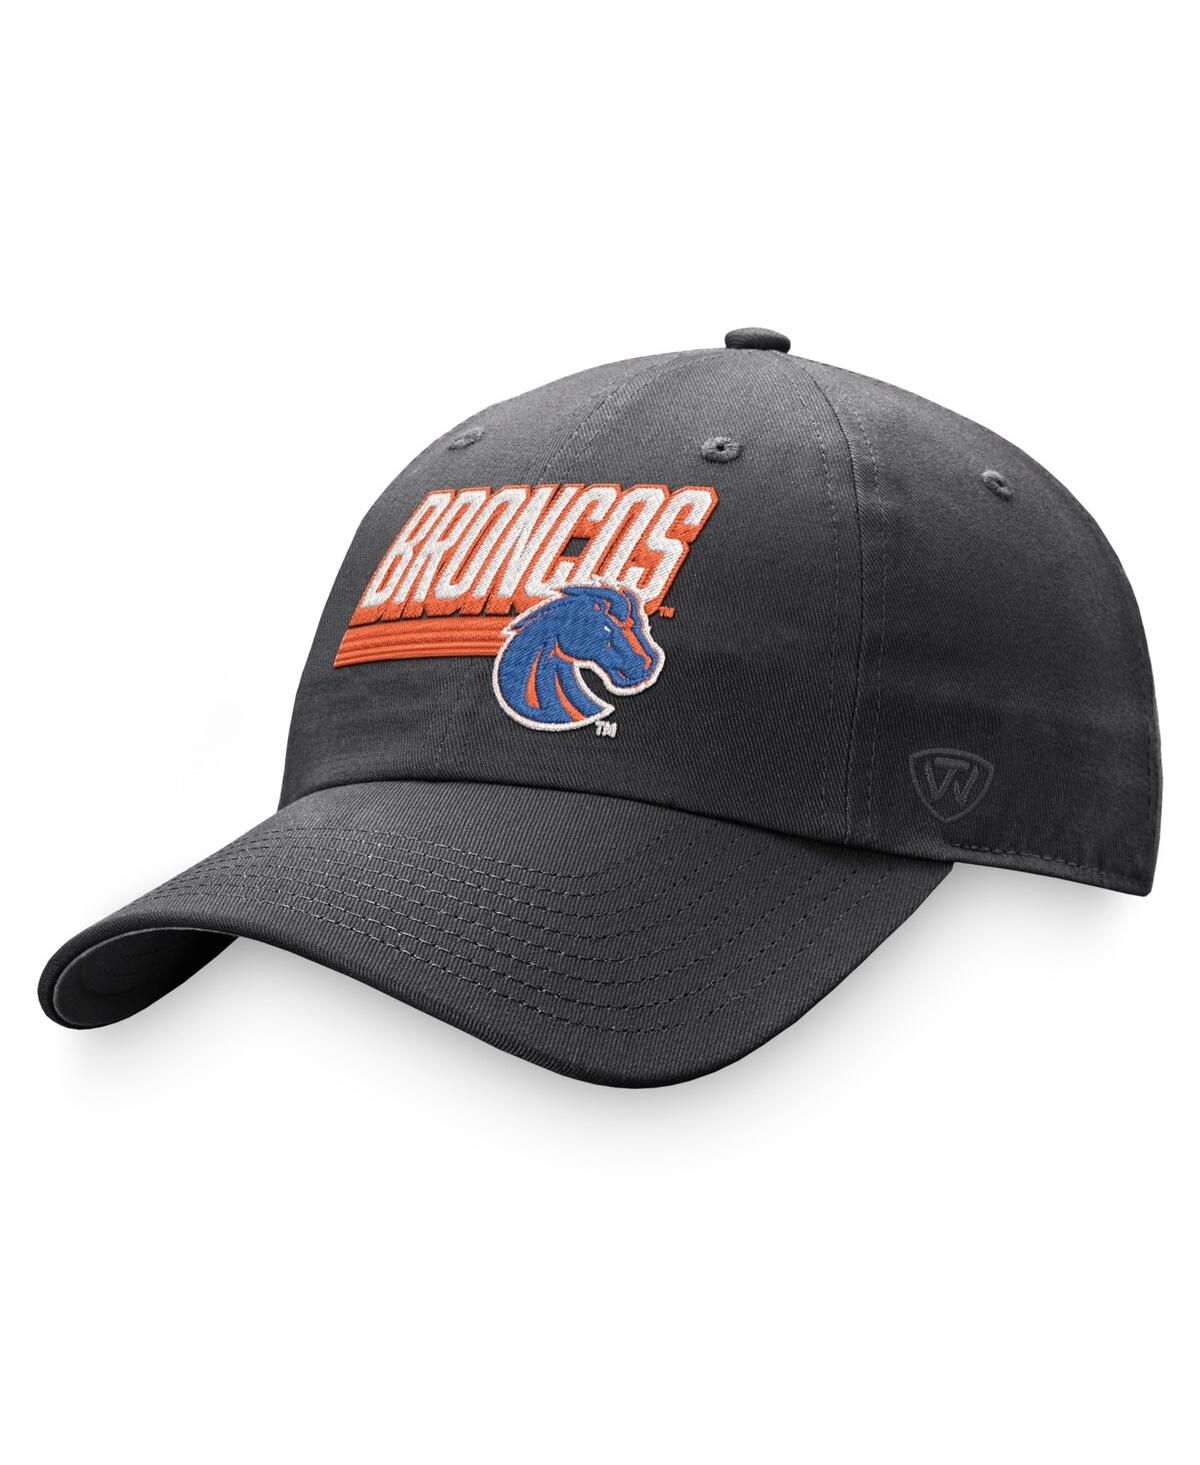 Men's Top of the World Charcoal Boise State Broncos Slice Adjustable Hat - Charcoal